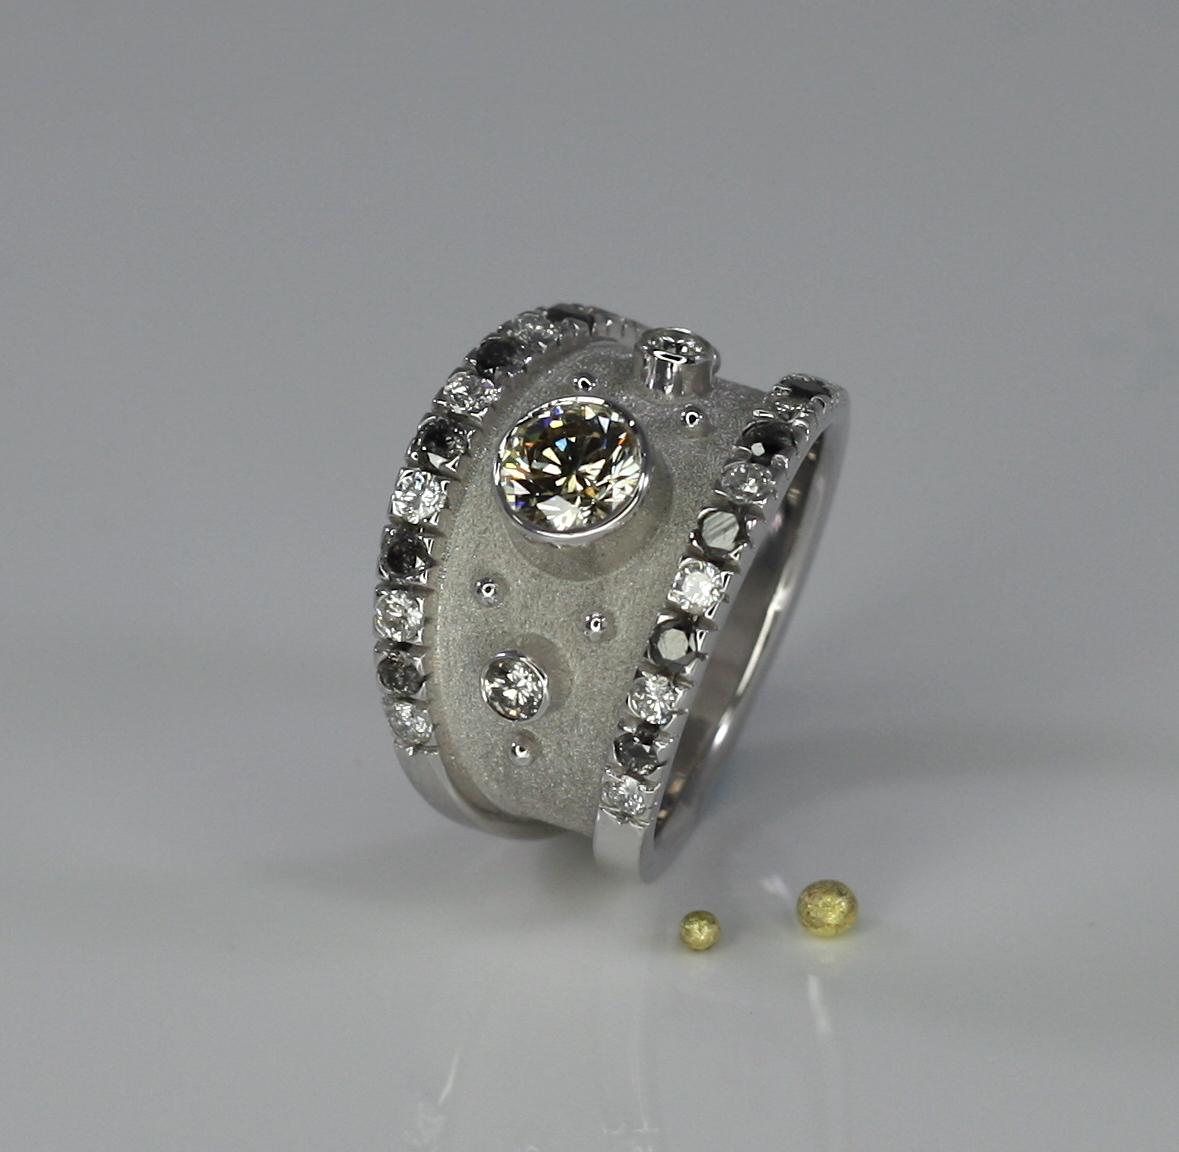 S.Georgios Designer Ring is all handmade from solid 18 Karat White Gold and is microscopically decorated with white gold beads a unique Byzantine velvet background. The Ring features a 0.75 Carat Brilliant cut Chocolate Diamond center and 2